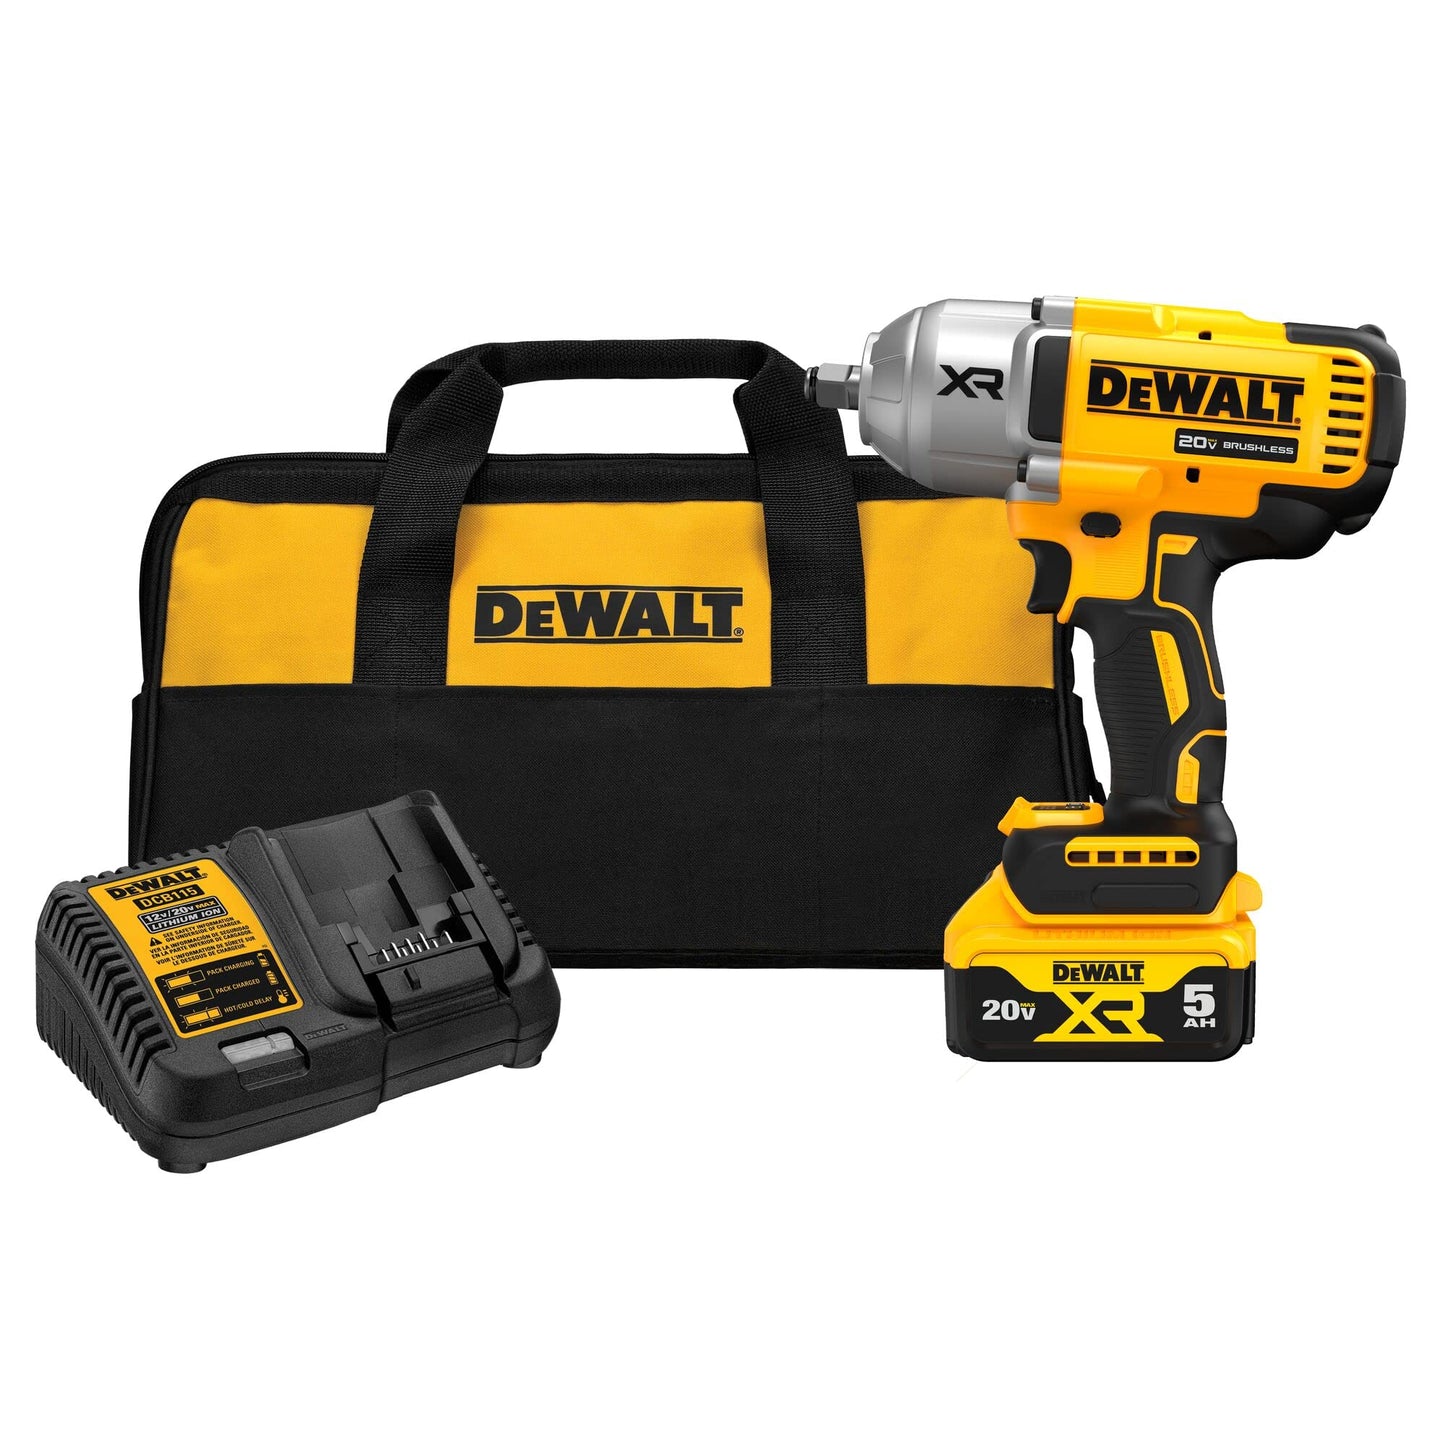 *DEWALT 20V MAX Cordless Impact Wrench Kit, 1/2" Hog Ring With 4-Mode Speed, Includes Battery, Charger and Bag (DCF900P1)